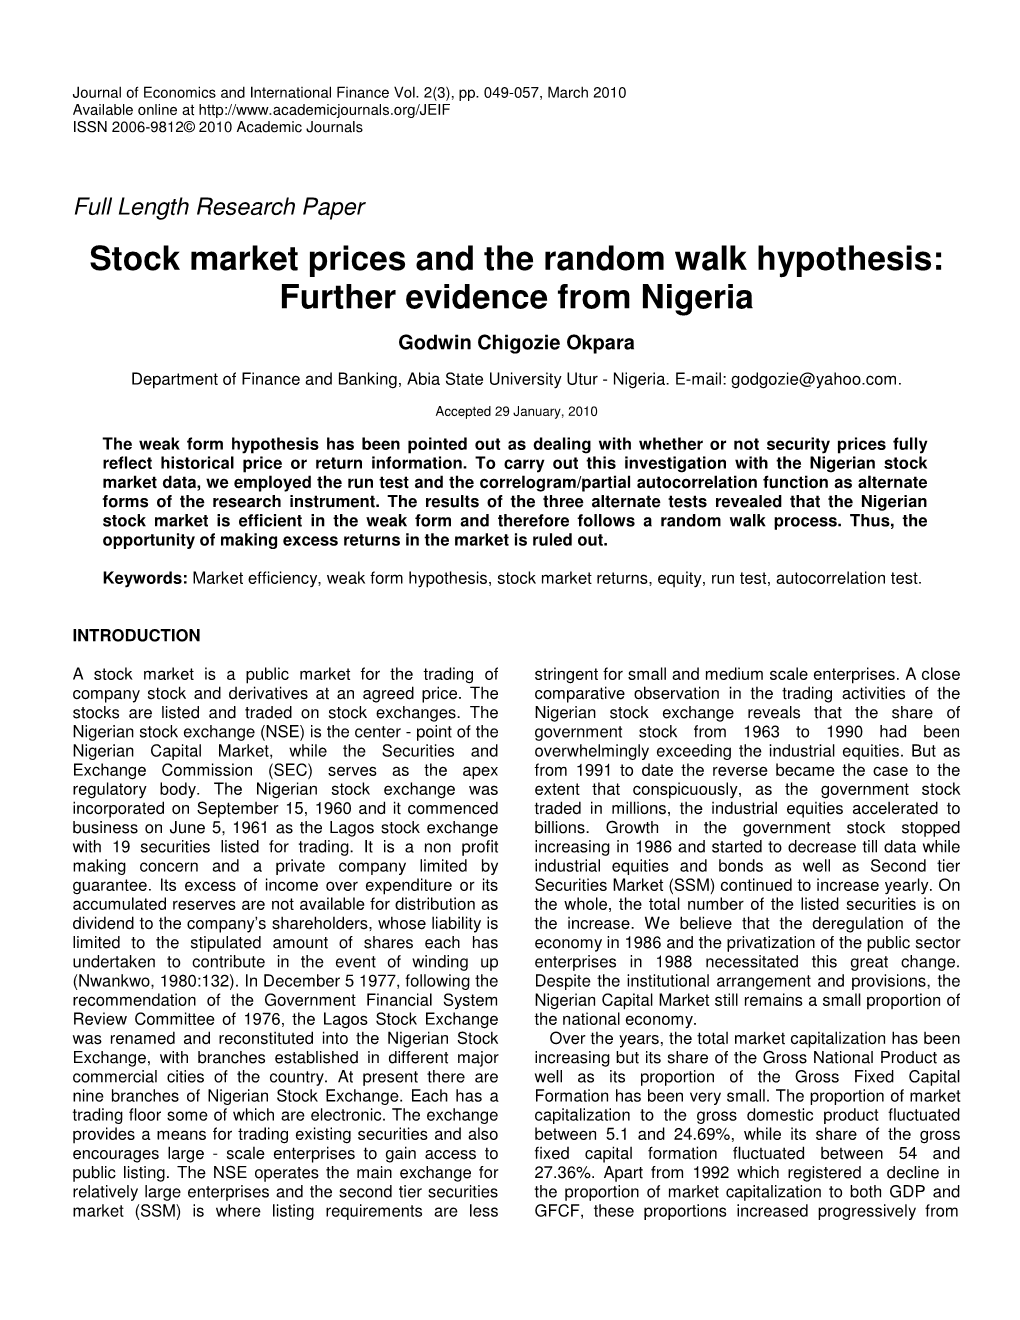 Stock Market Prices and the Random Walk Hypothesis: Further Evidence from Nigeria